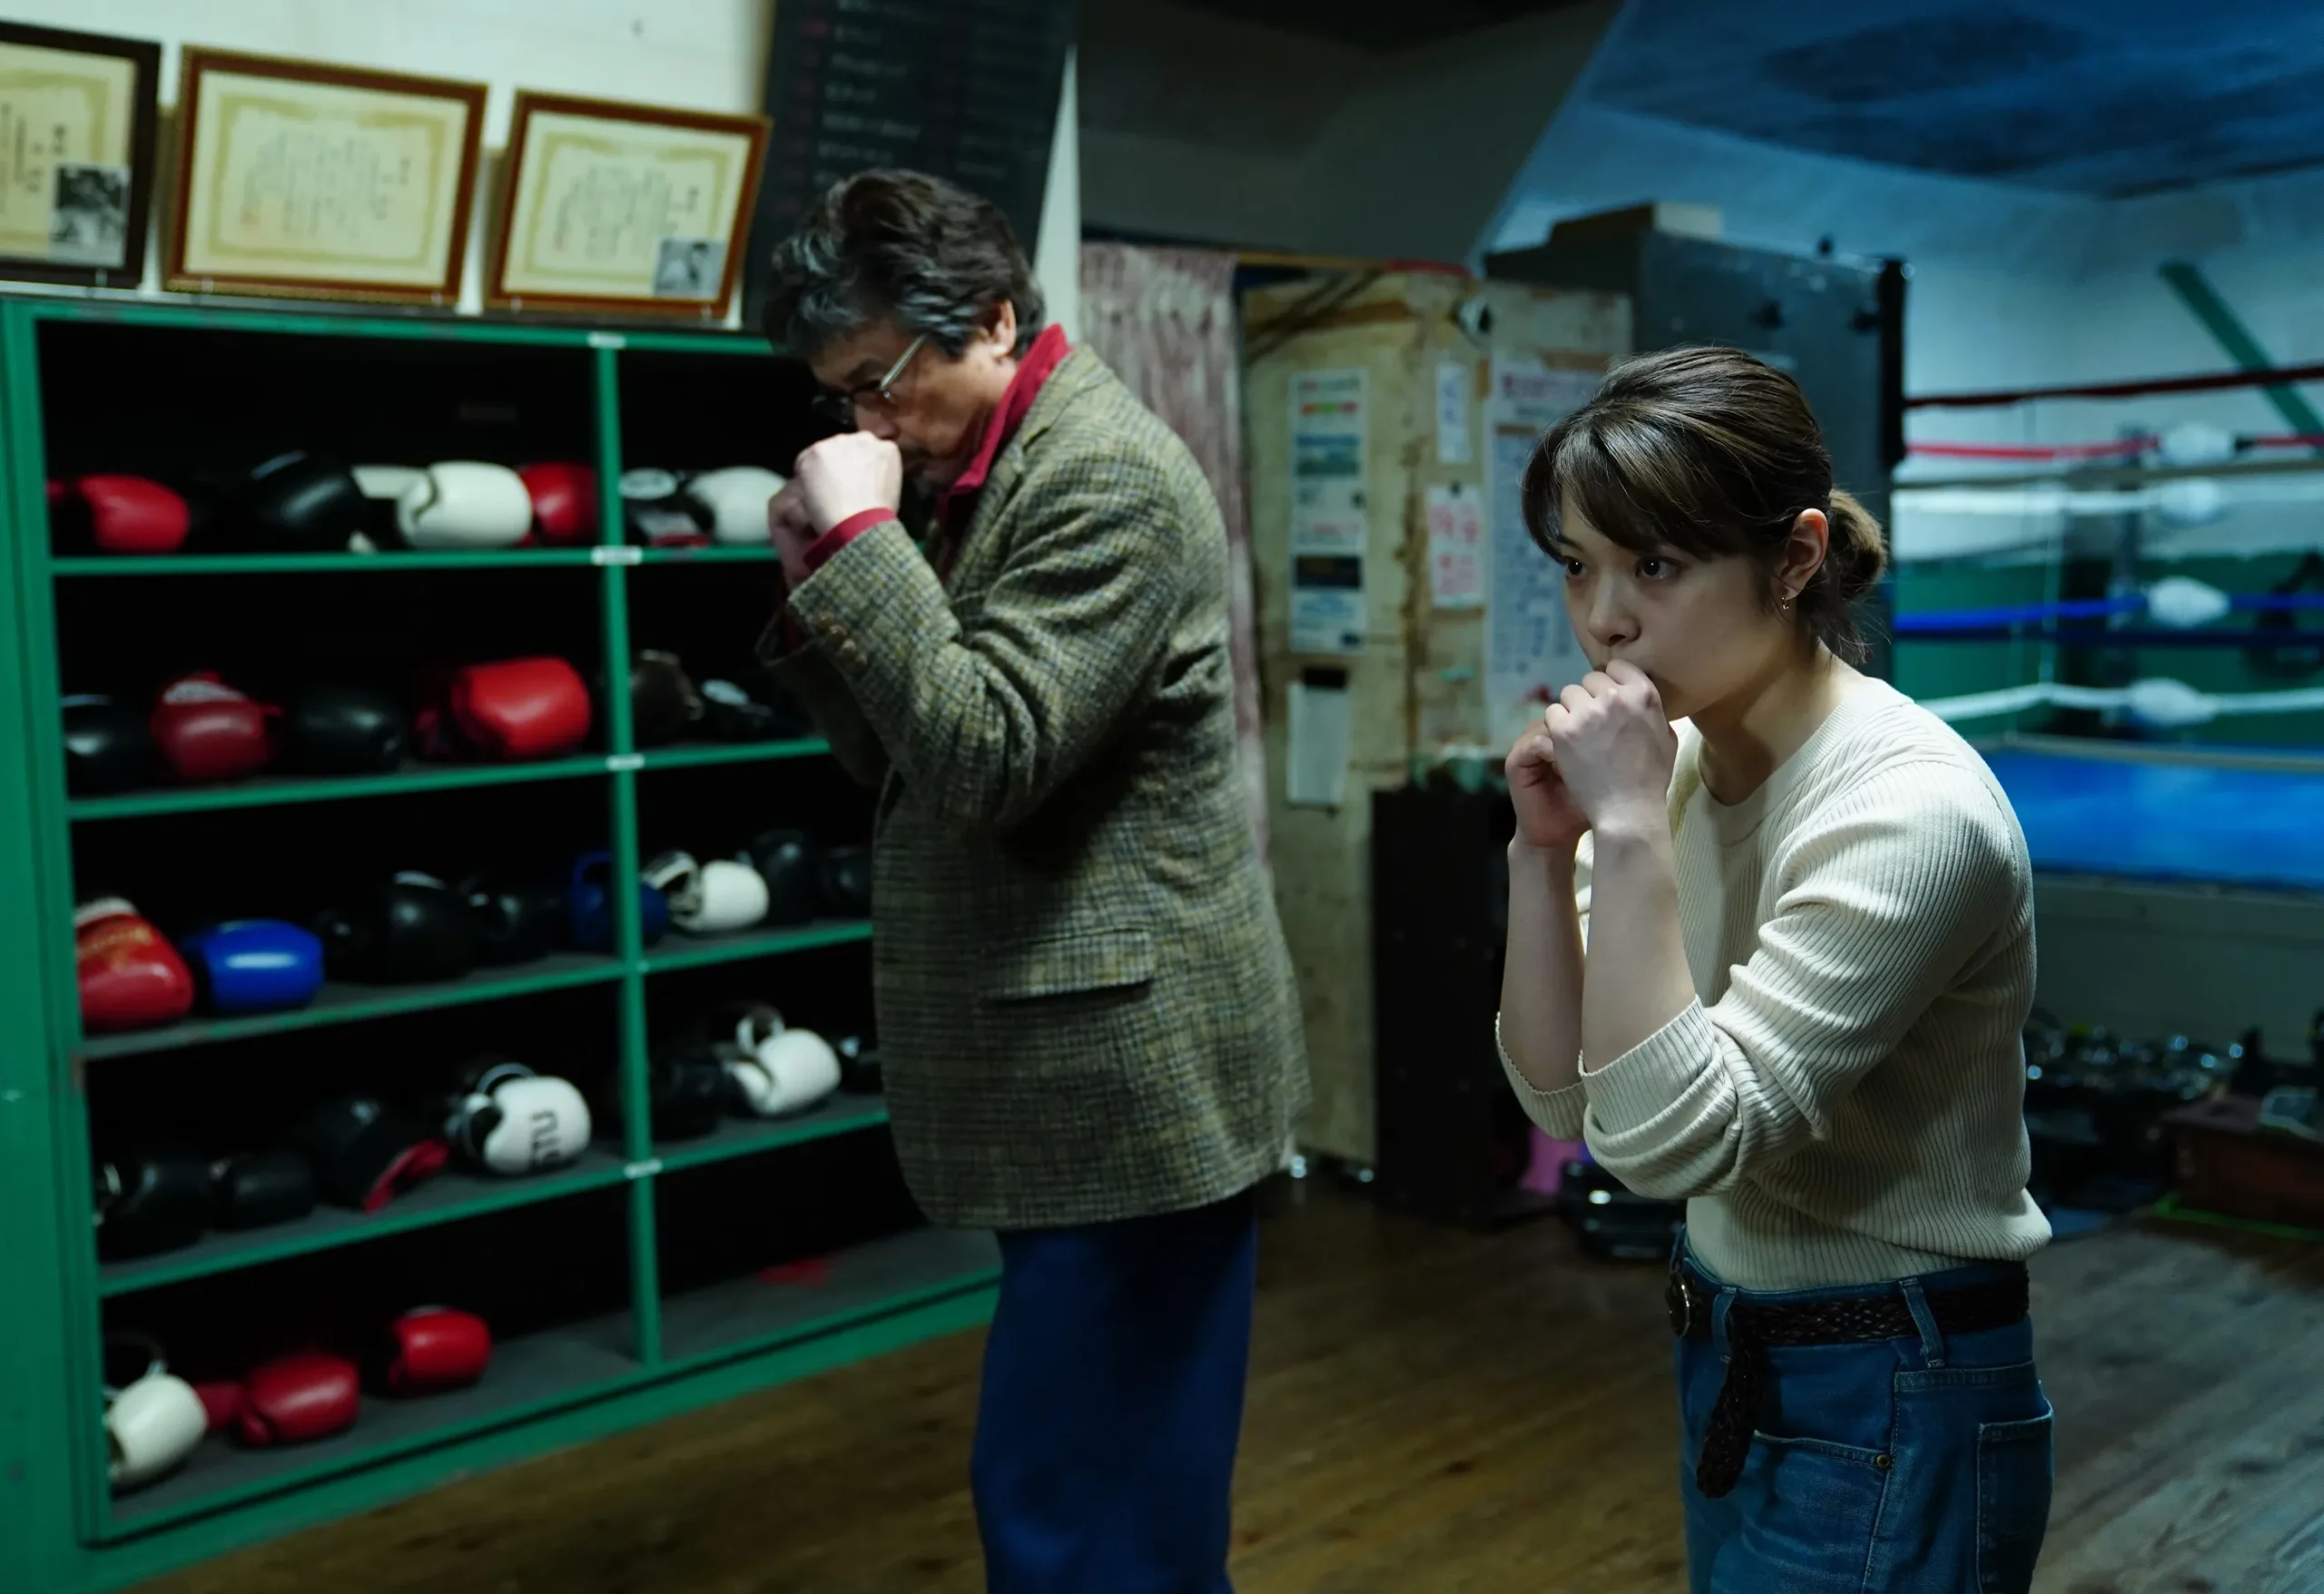 What is so good about 'Small, Slow but Steady', Japan's best film of the year? | FMV6